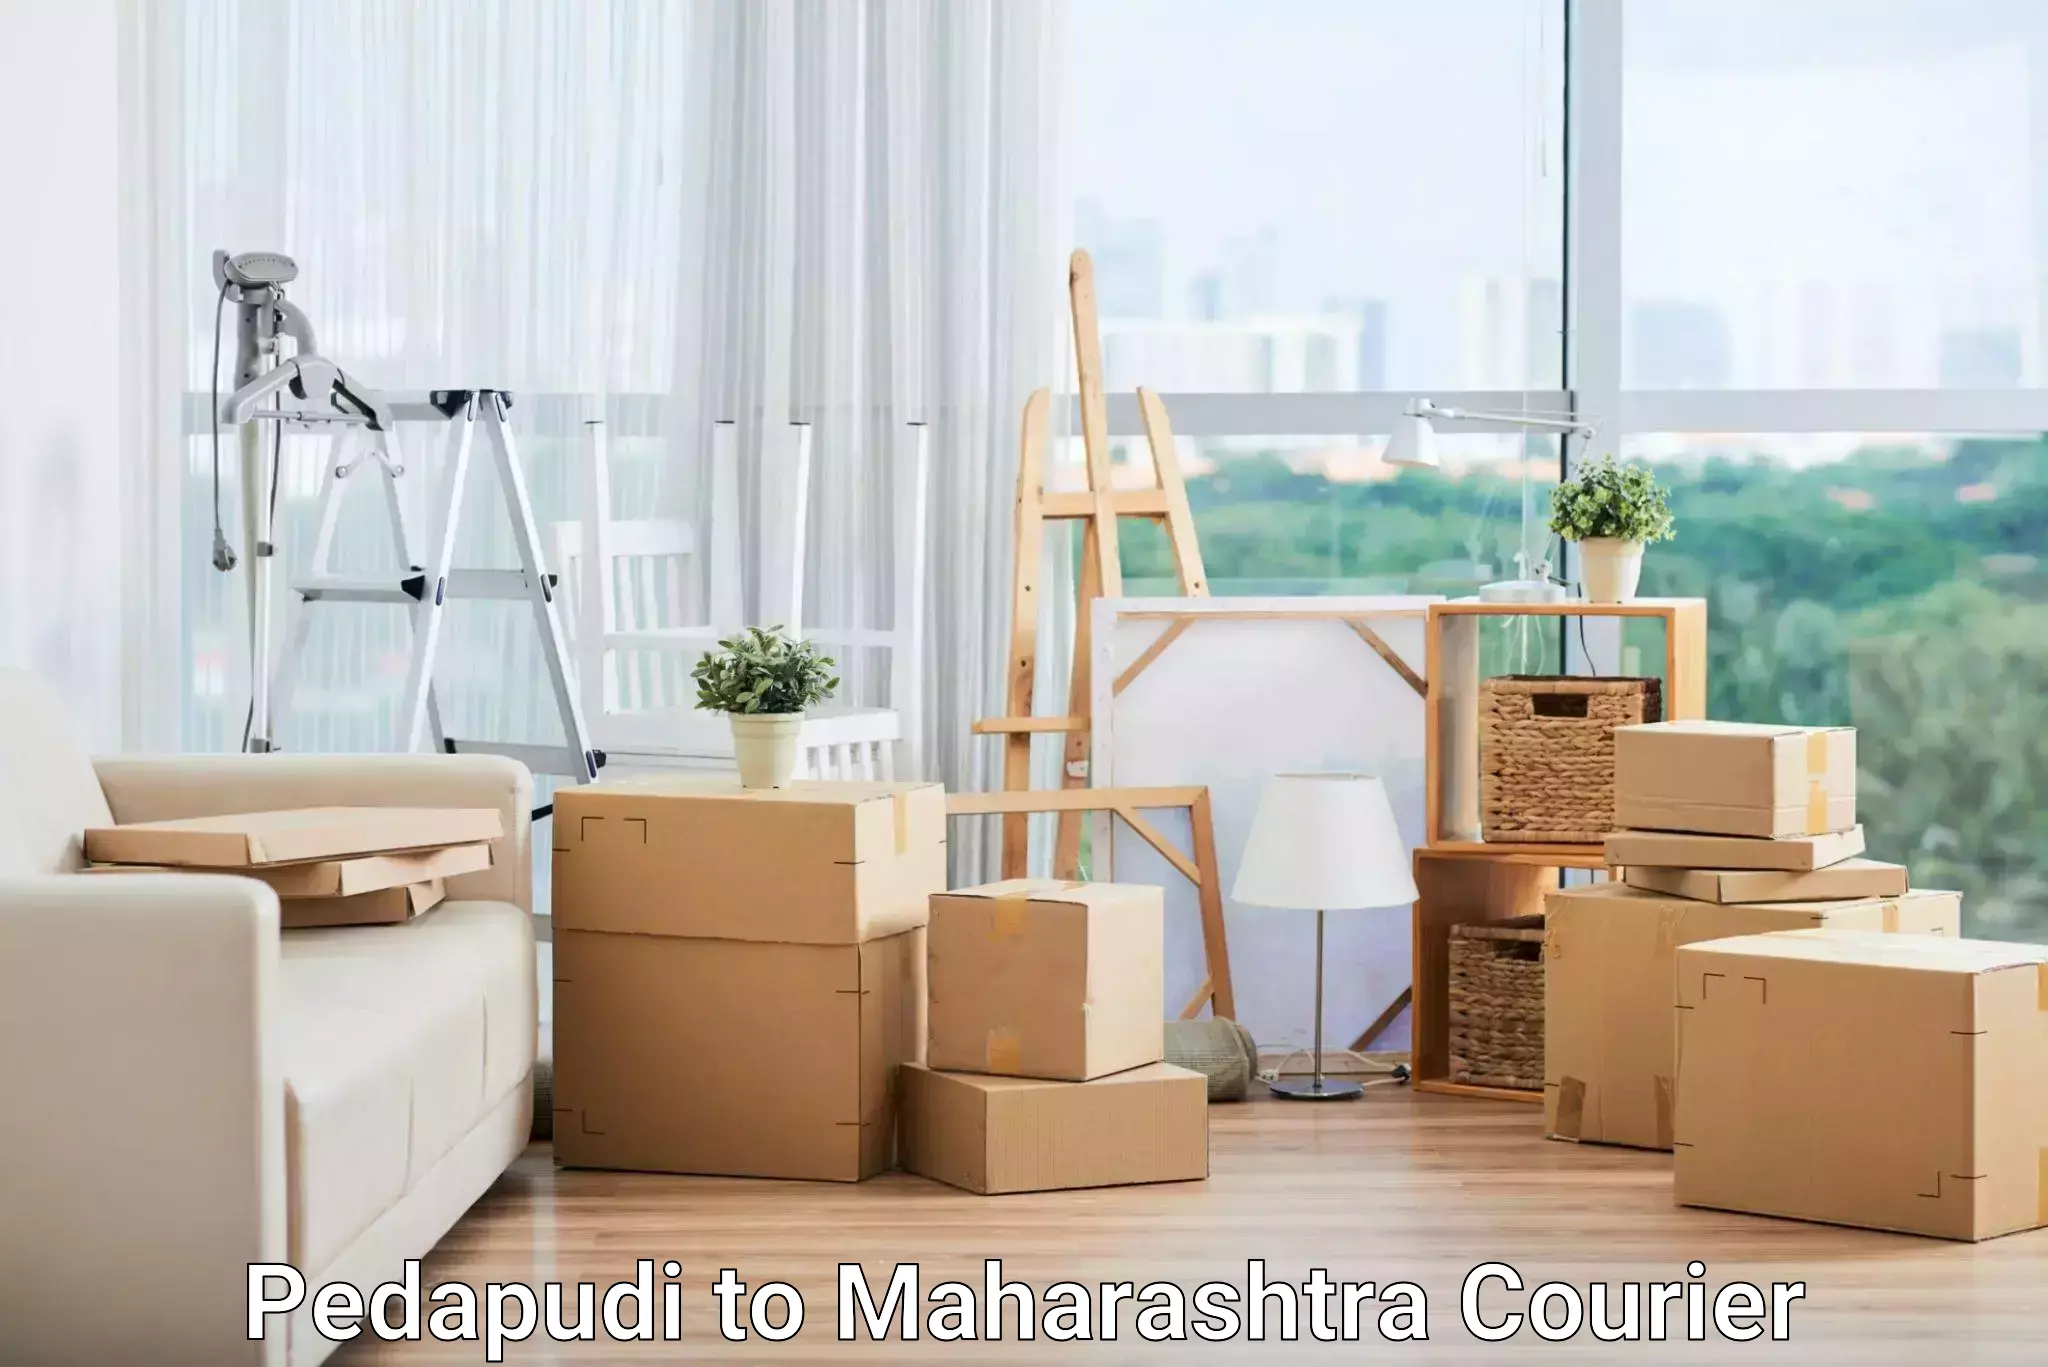 Subscription-based courier Pedapudi to Ulhasnagar